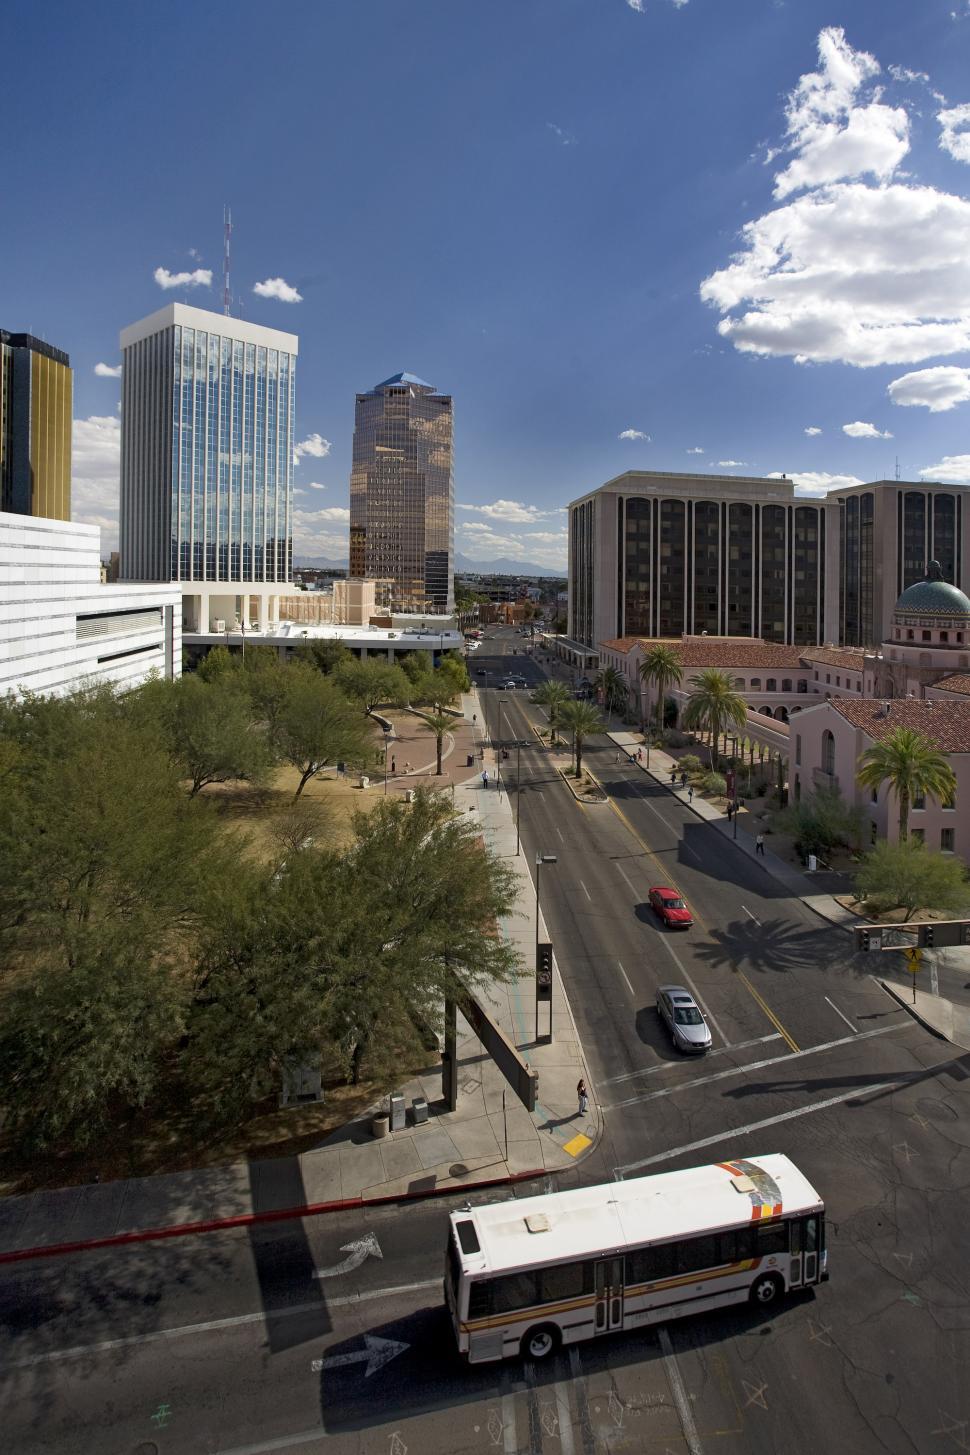 Free Image of Downtown Tucson with Bus 